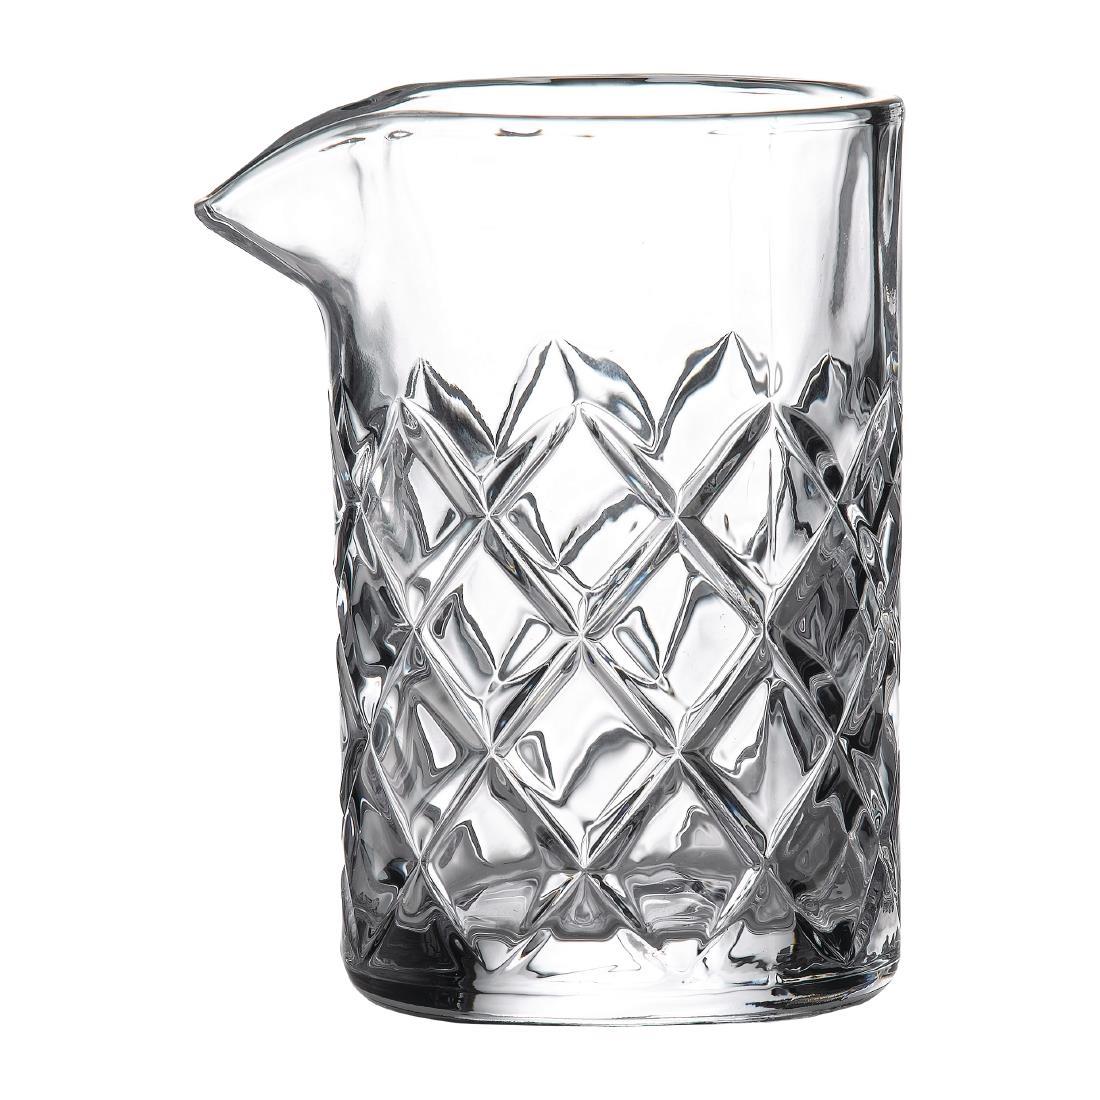 Cocktail mixing Glass 400ml - CK574  - 1